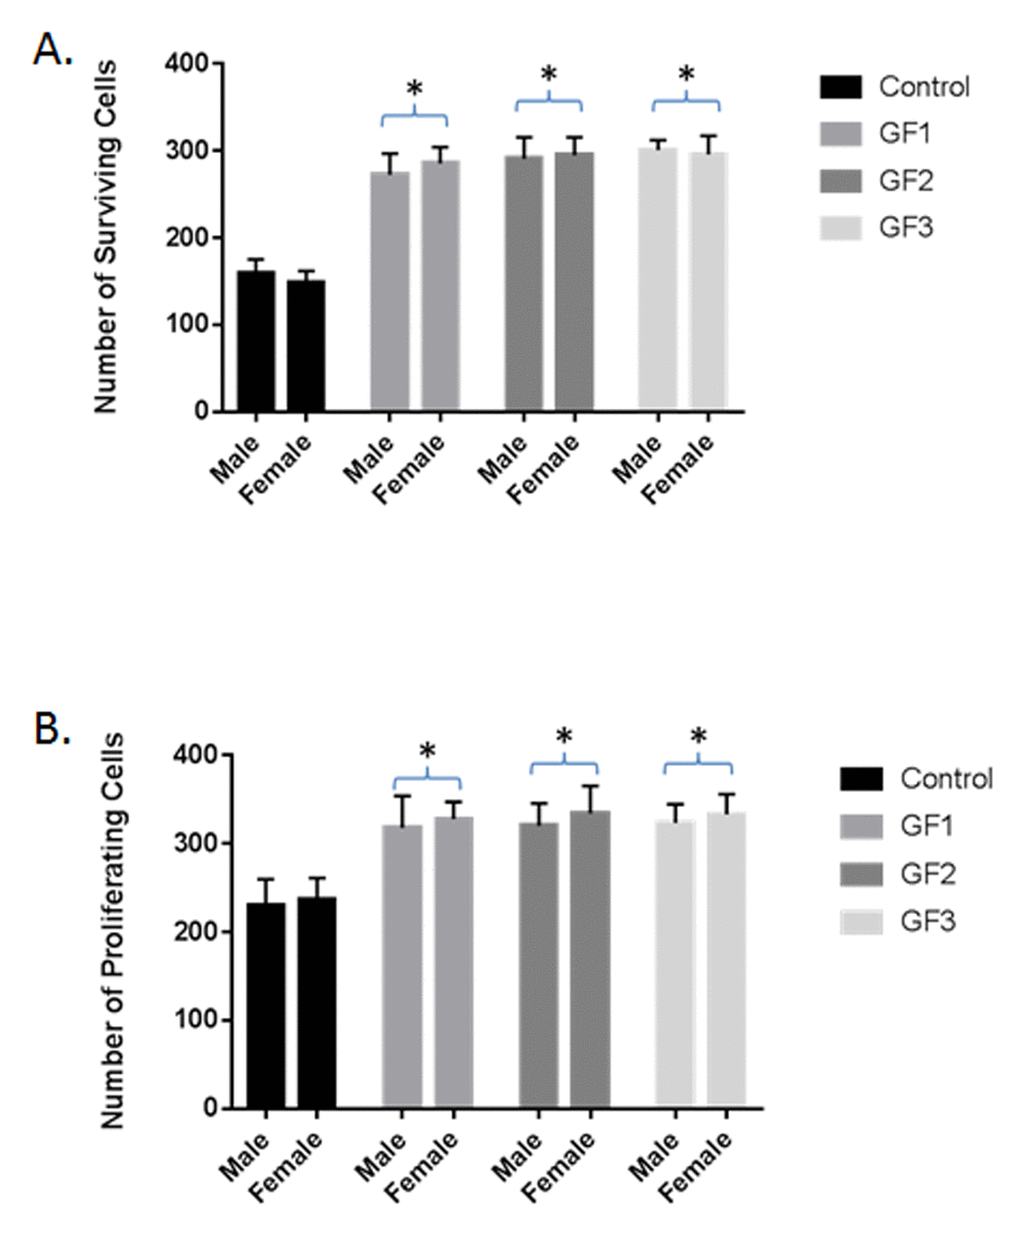 Neuroprotection and neurogenesis. The number of surviving (A) and proliferating (B) precursor cells in the dentate gyrus of the hippocampus of rats in the control, GF1, GF2 or GF3 diet groups. Values are means, with their standard errors represented by vertical bars. N = 20 per group. *P